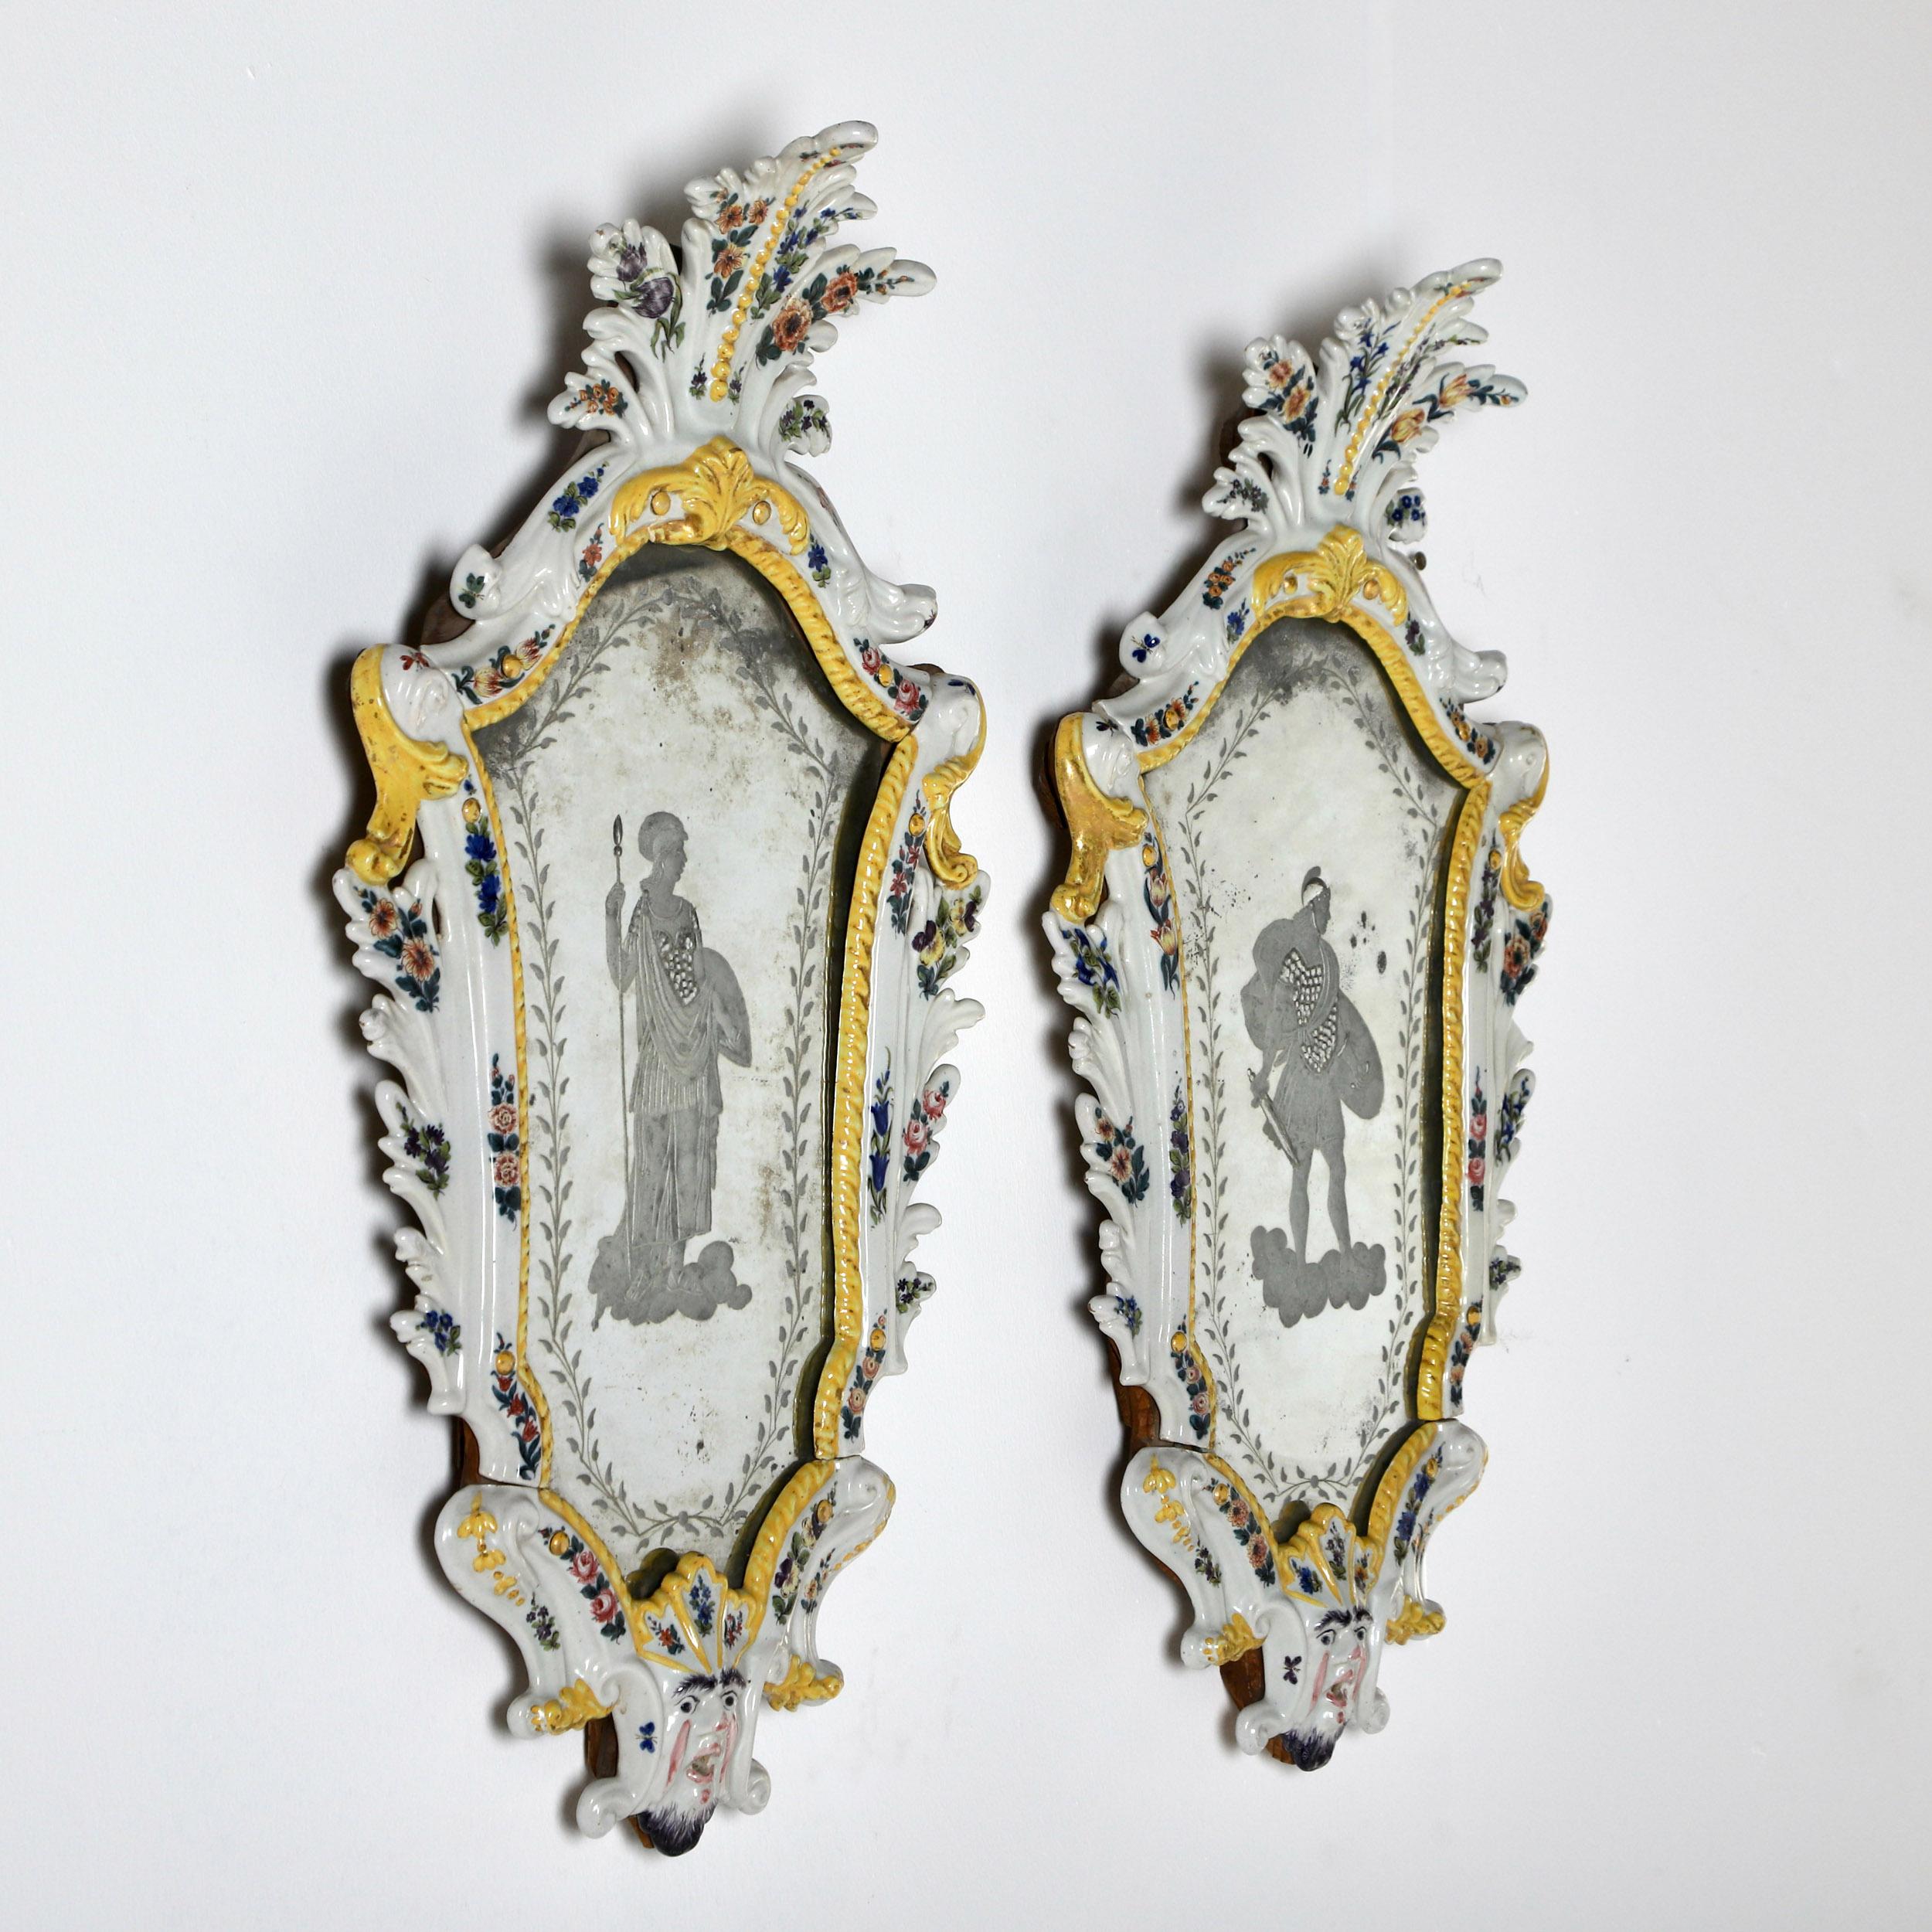 A wonderful pair of 19th century polychrome hand decorated maiolica mirror frames with inset venetian etched glass plates depicting Mars & Minerva 

For a similar pair of mirrors see Christies sale – 17185 – important Italian collection – lot 75